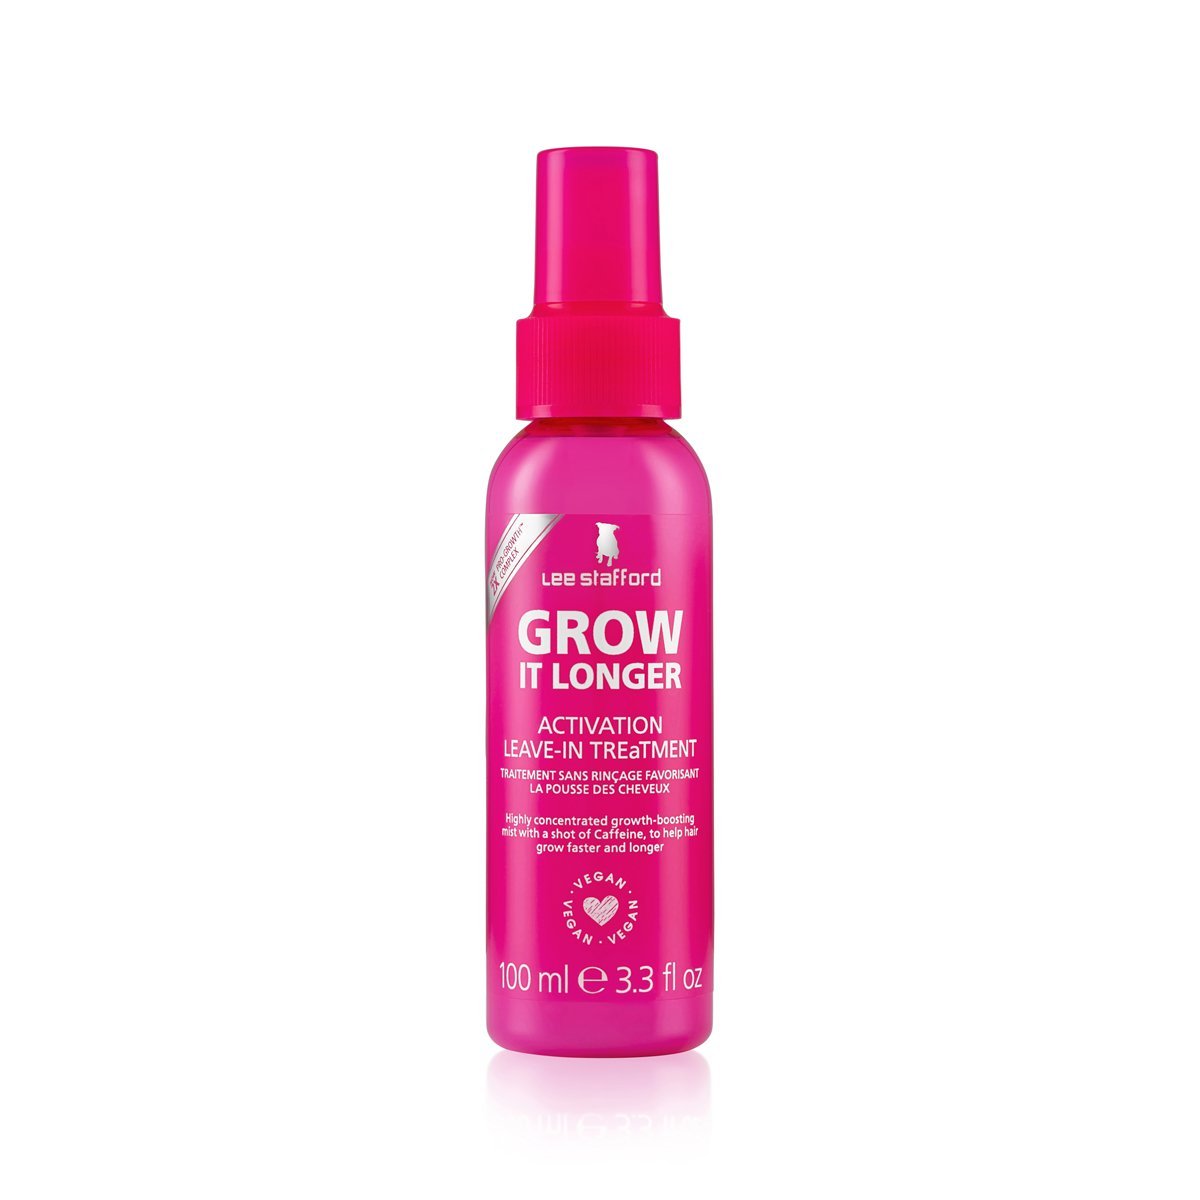 Grow It Longer Activation Leave-In Treatment